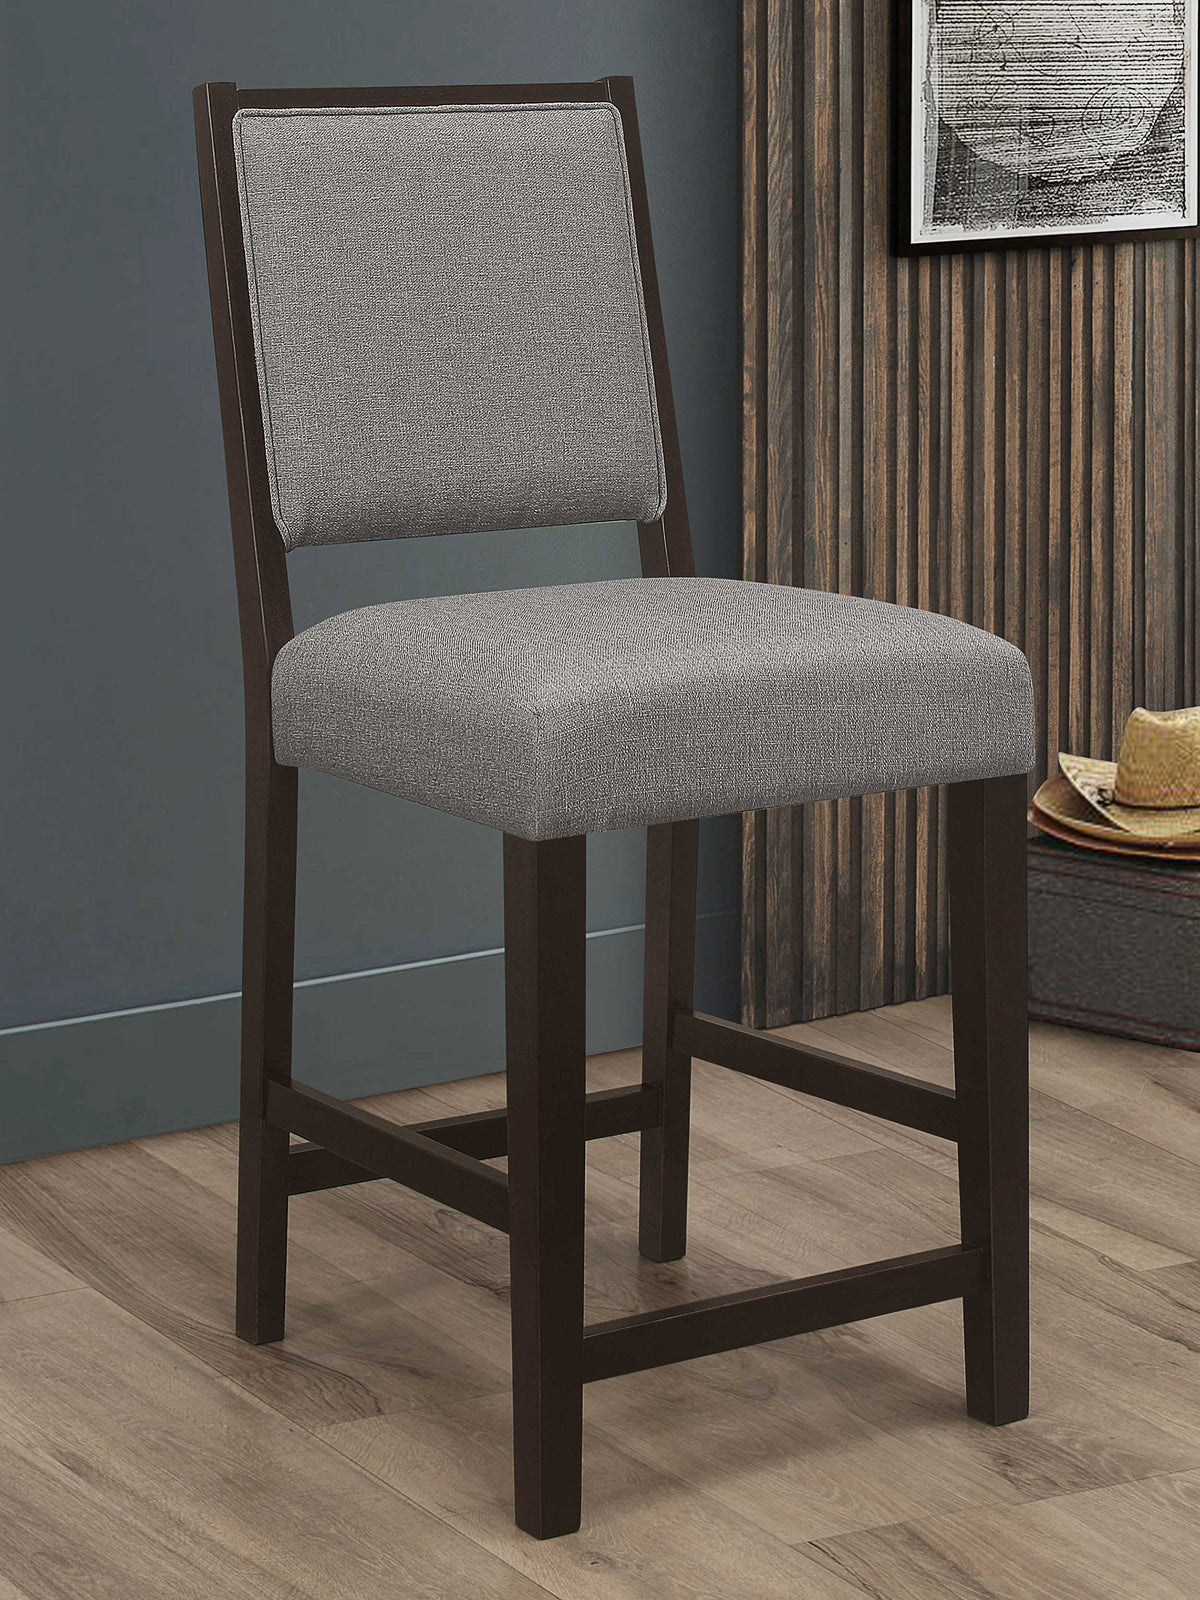 Bedford Upholstered Open Back Counter Height Stools with Footrest (Set of 2) Grey and Espresso  Half Price Furniture